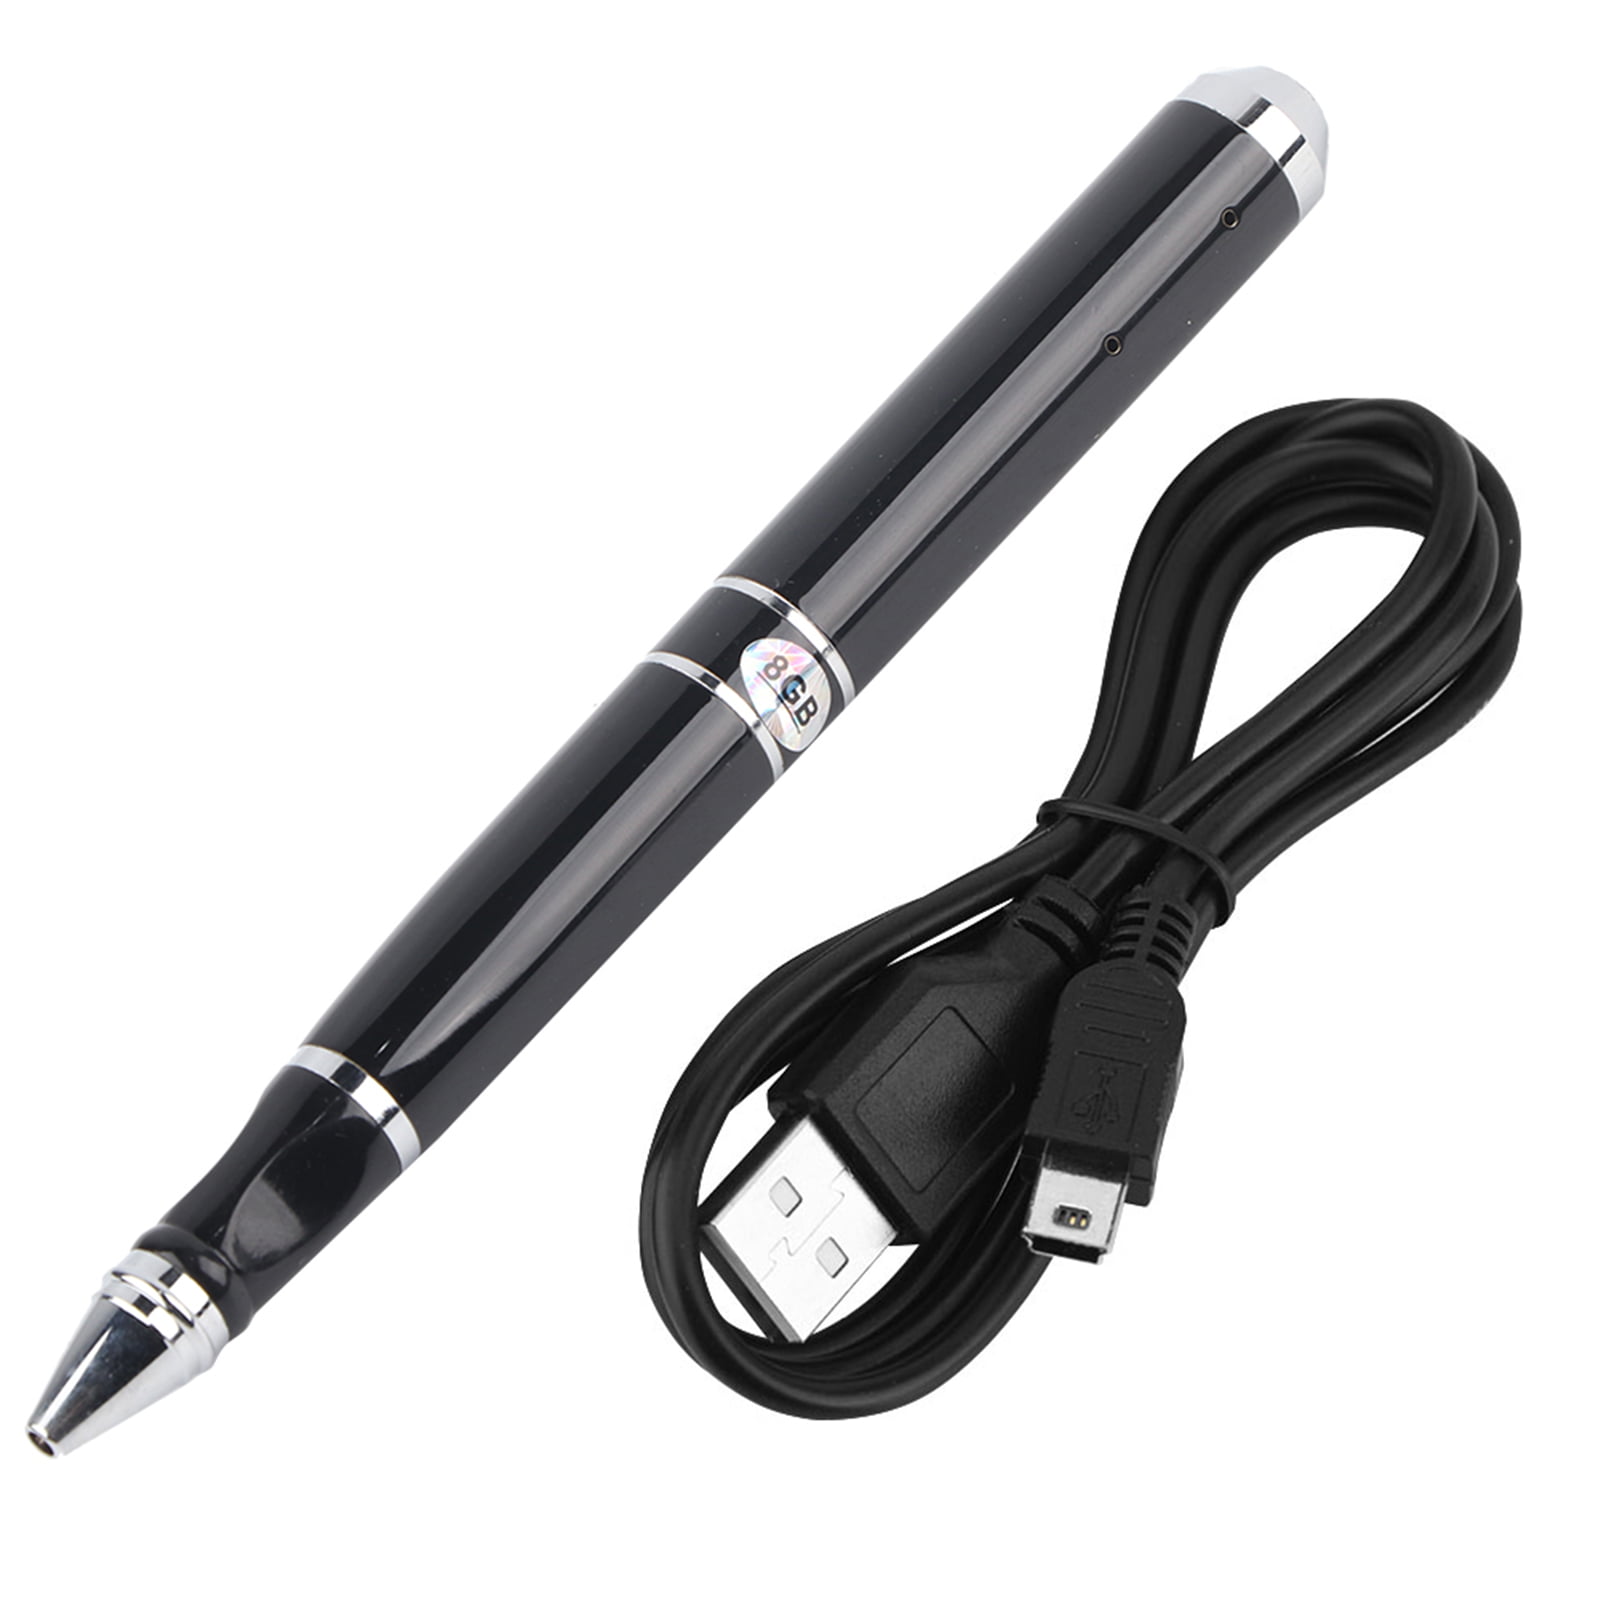 Digital Voice Recorder Pen 21-hour Recording Time Stamp Audio Recorder 8G Memory 